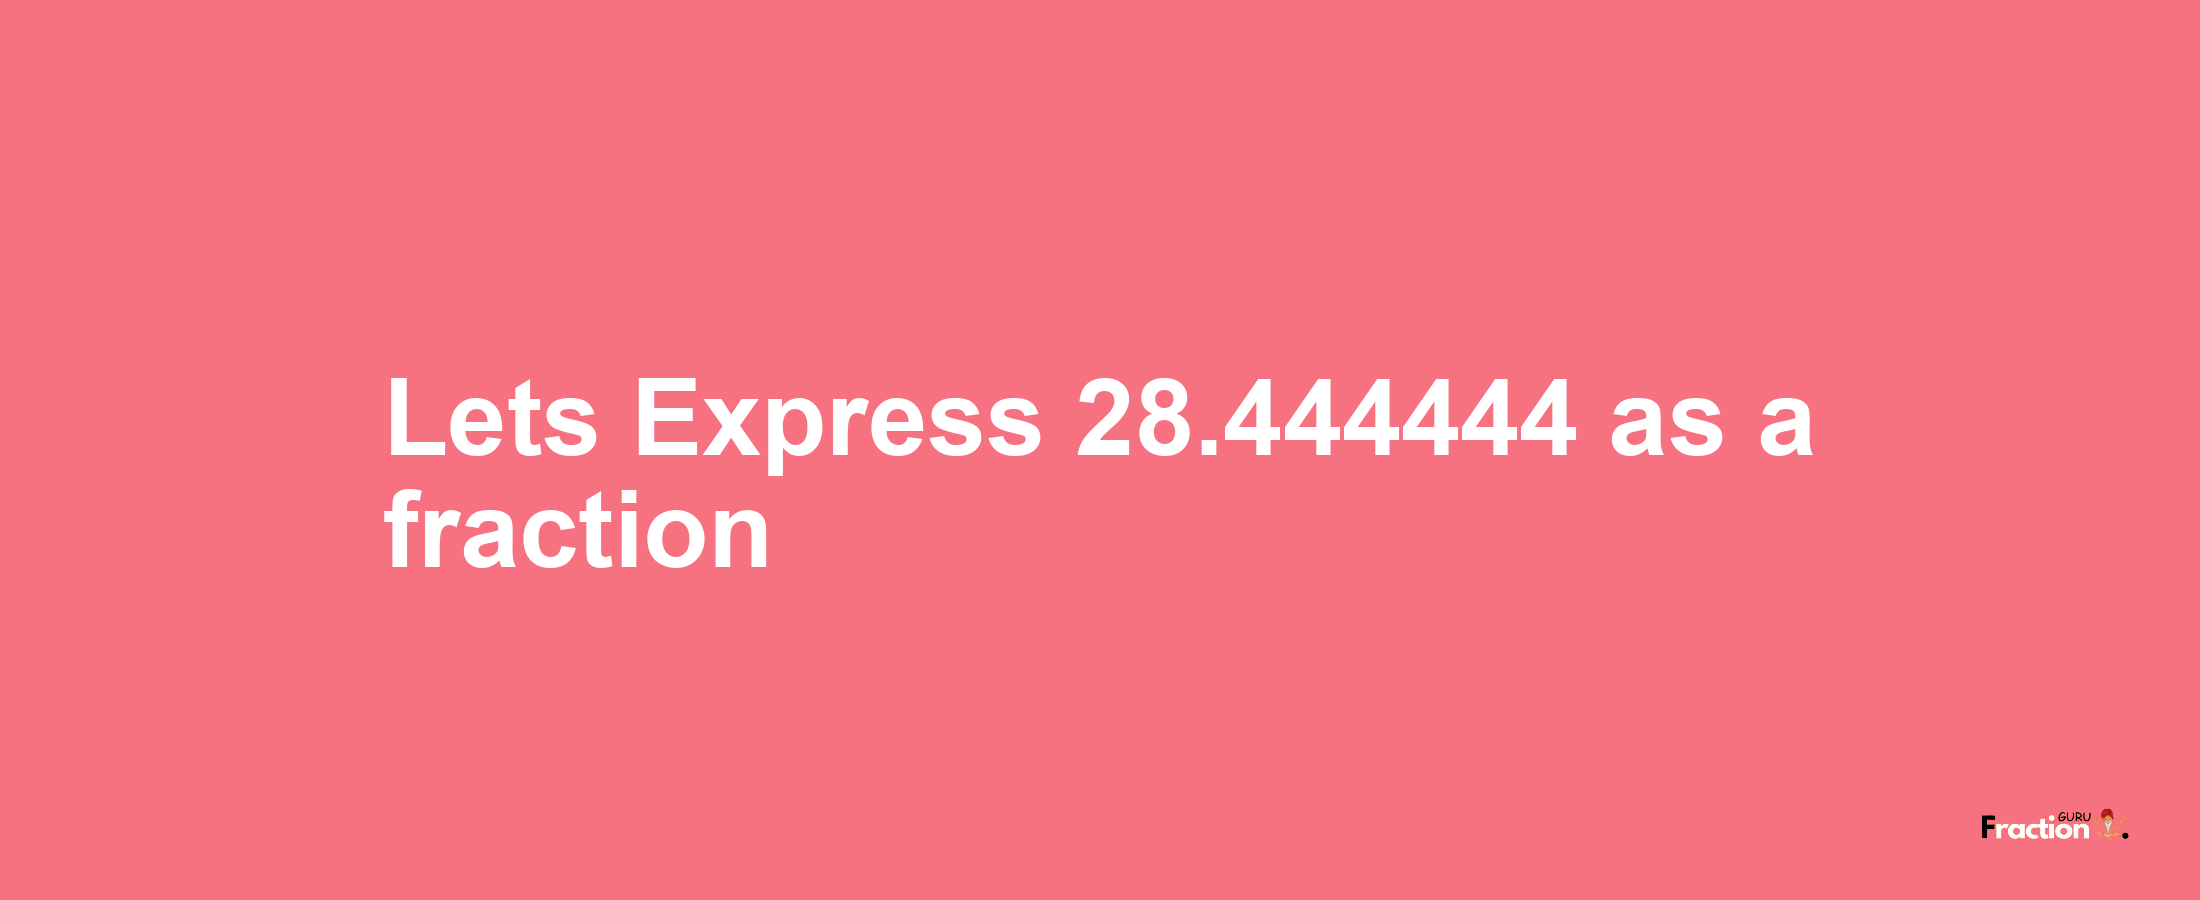 Lets Express 28.444444 as afraction